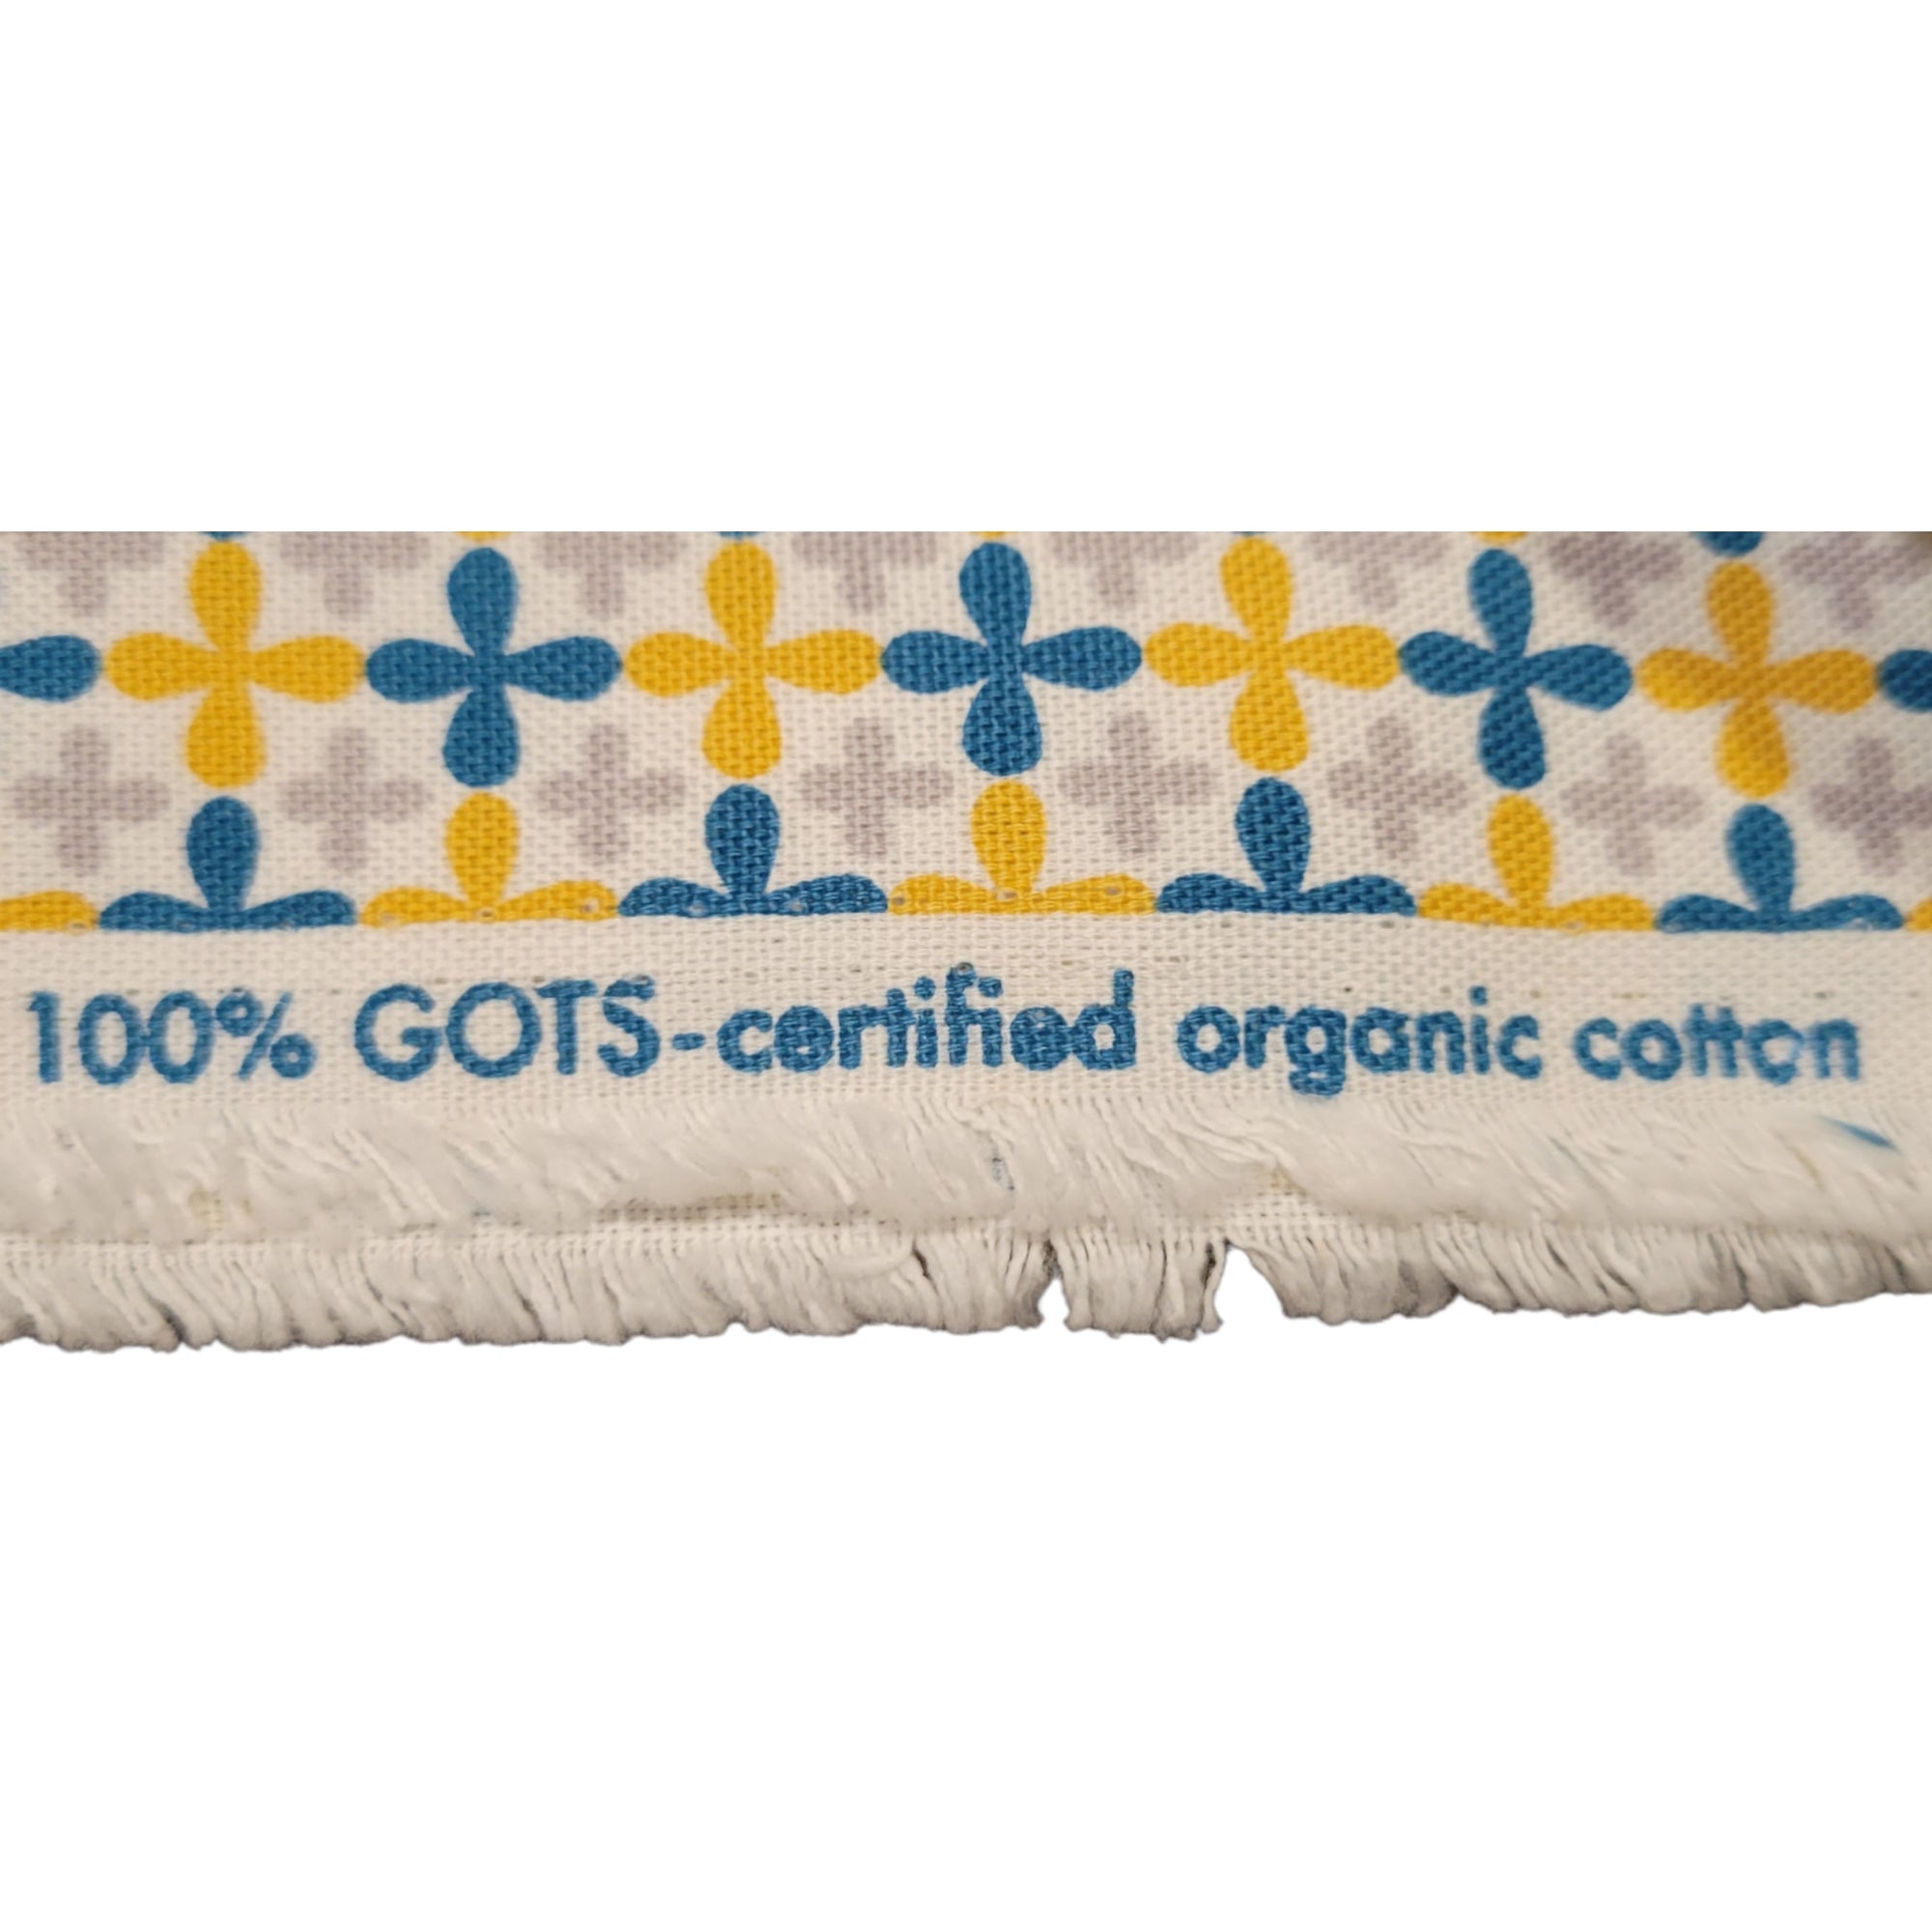 Organic cat kicker toy by Momma Knows Best